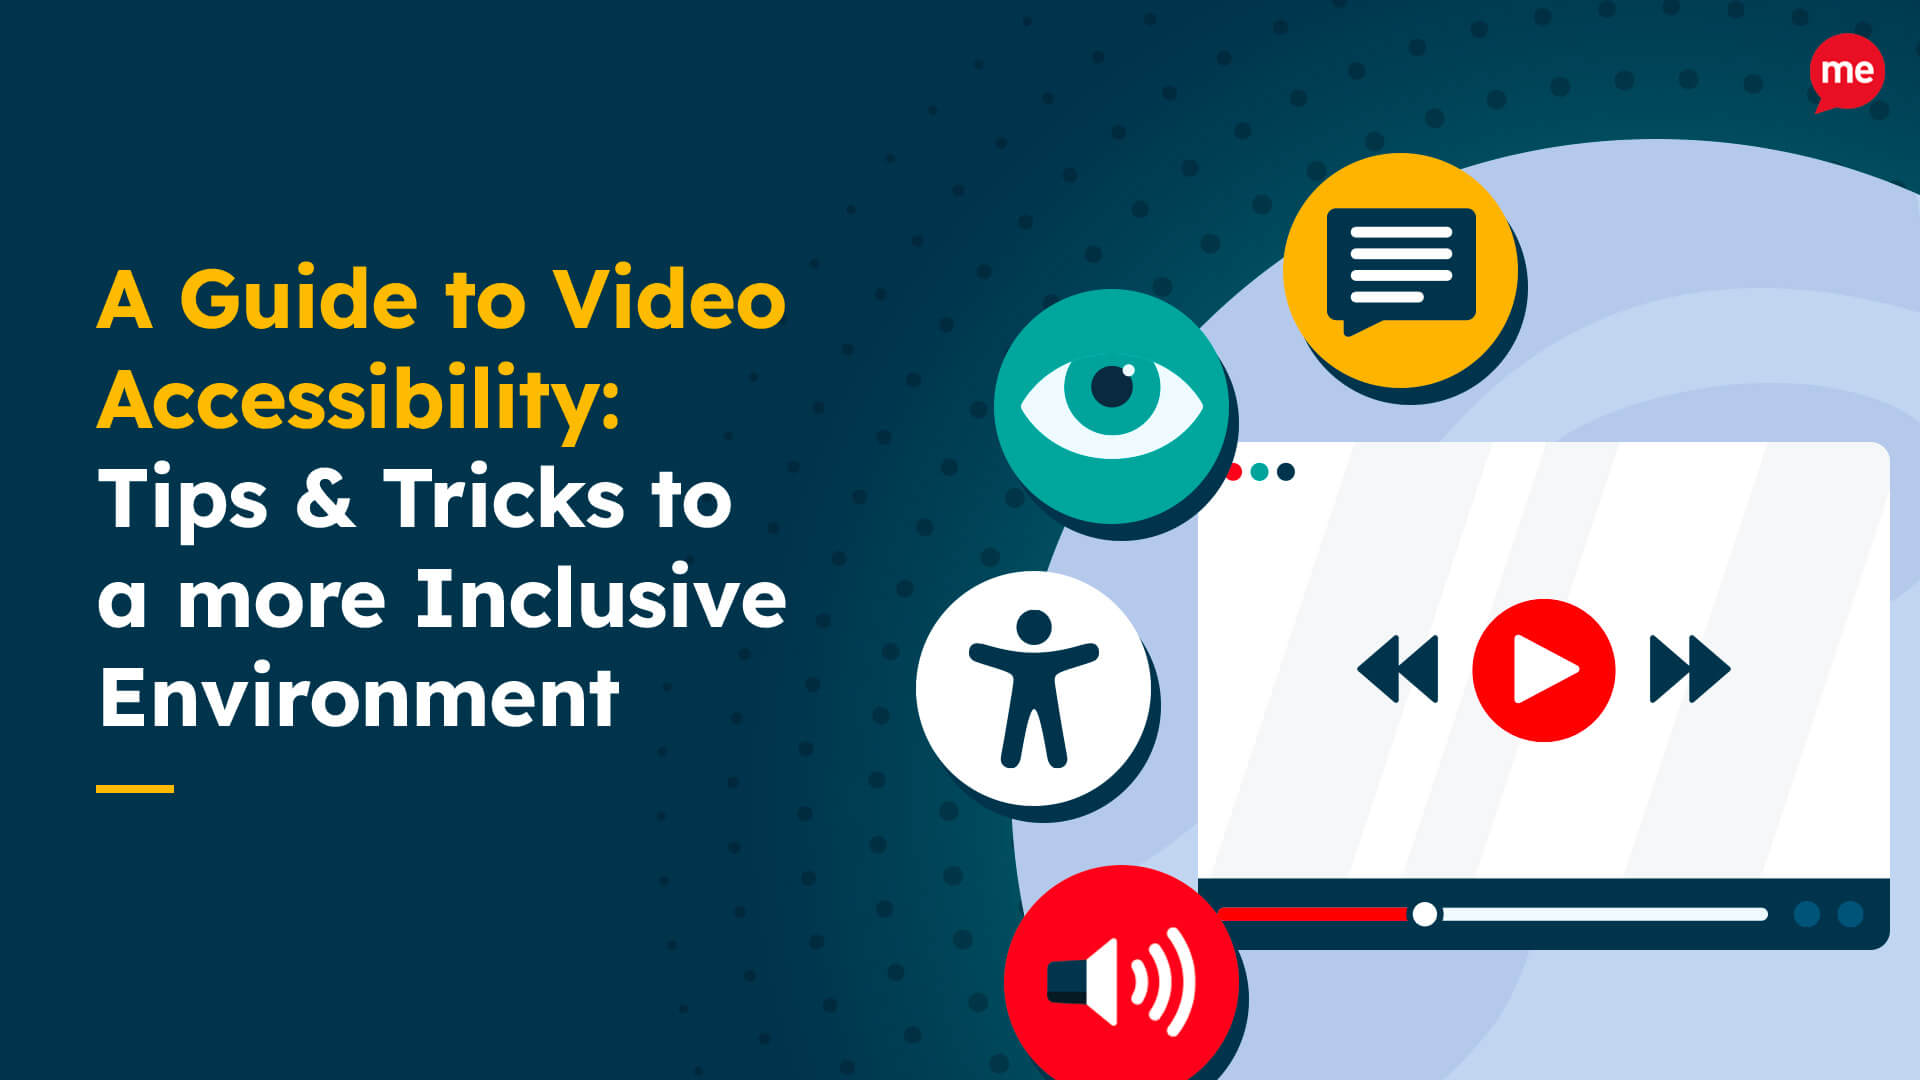 A Guide to Video Accessibility: Tips & Tricks to a more Inclusive Environment